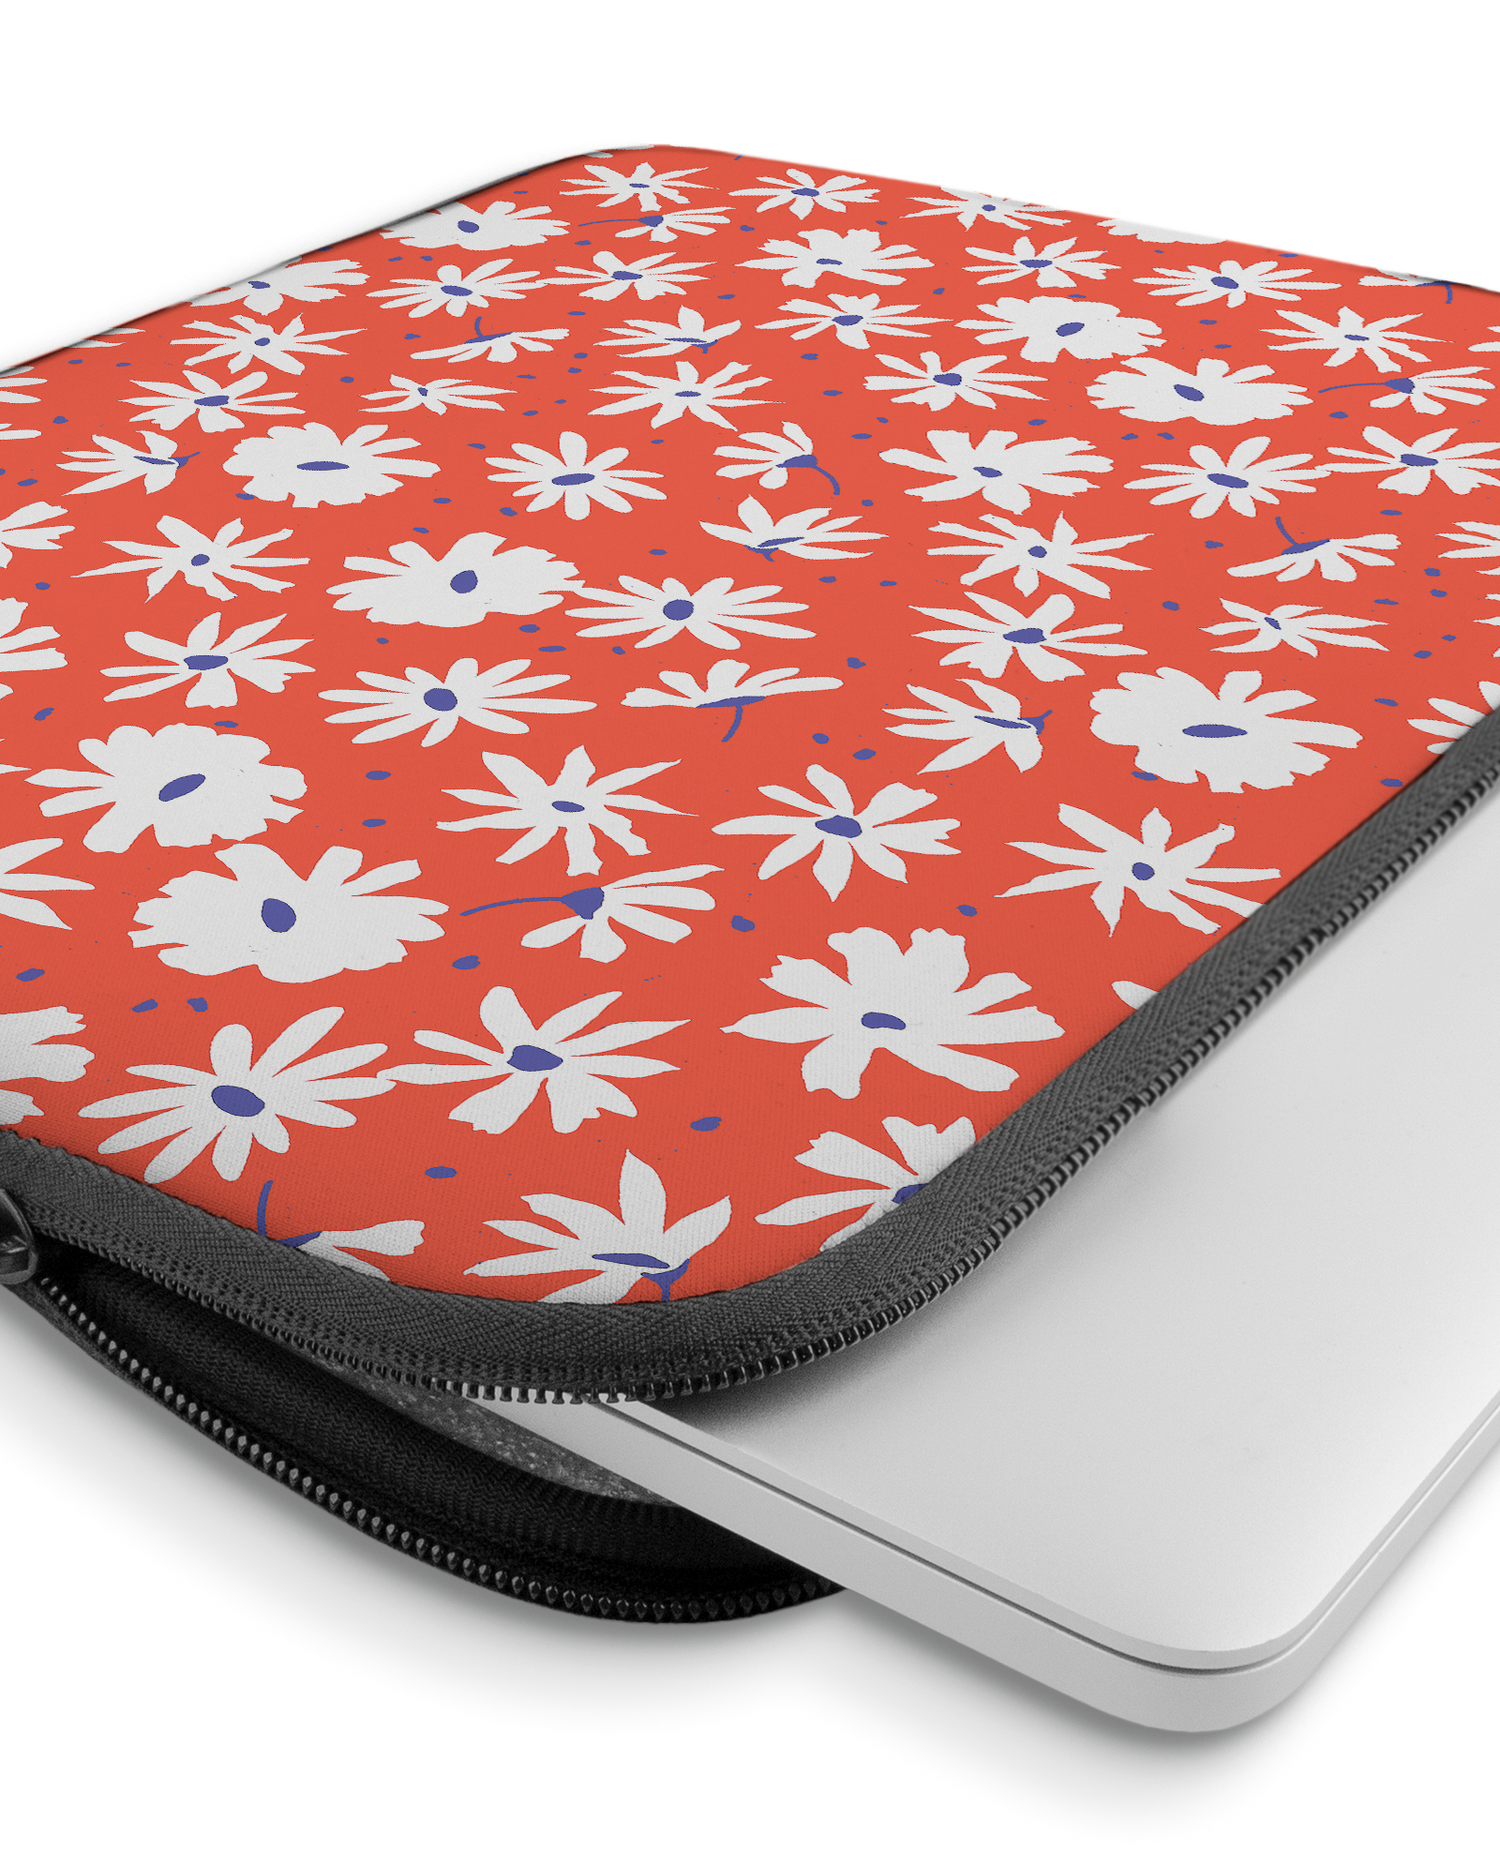 Retro Daisy Laptop Case 15 inch with device inside